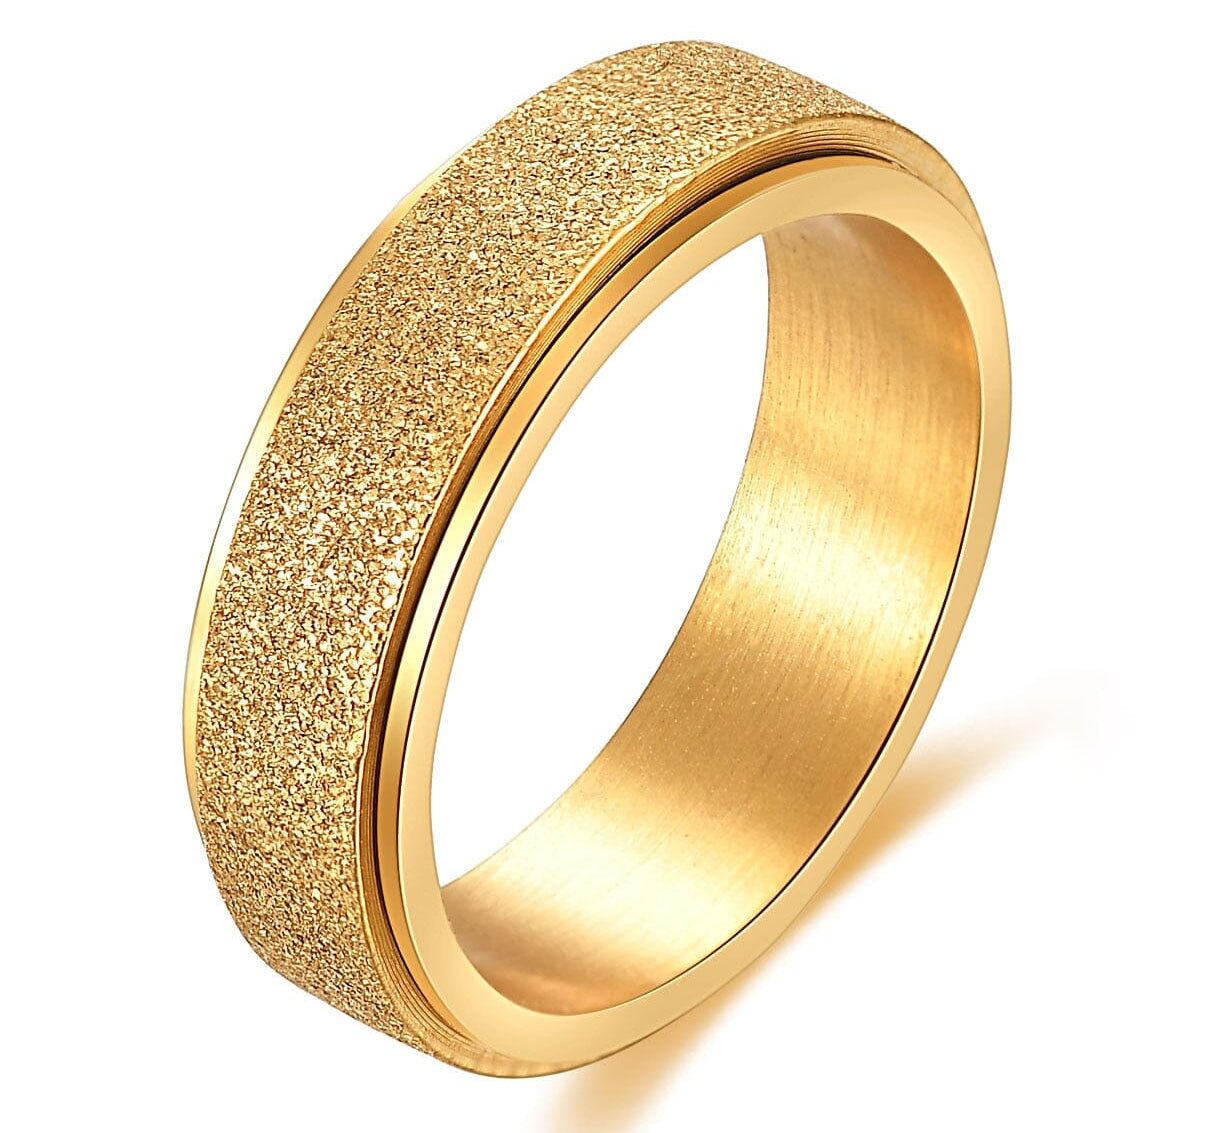 VQYSKO 6MM Anxiety Relief Spinner Ring for Women and Man Stainless Steel Sand Blast Glitter Finish Gold Color Fidget Ring Band 0 The Autistic Innovator Gold 4 